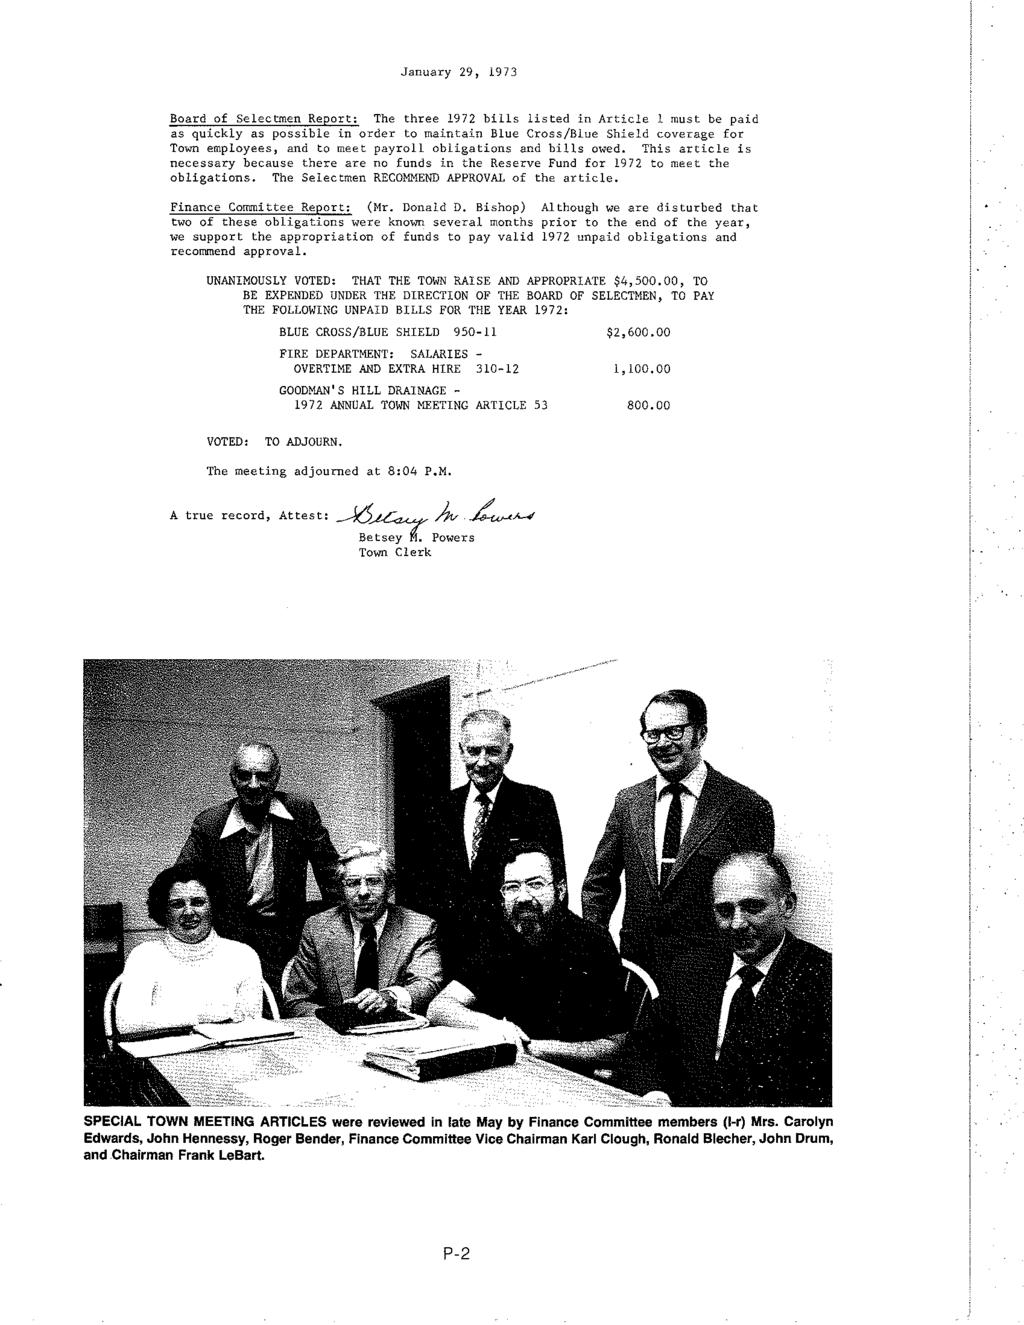 January 29, 1973 Board of Selectmen Report: The three 1972 bills listed in Article 1 must be paid as quickly as possible in order to maintain Blue Cross/Blue Shield coverage for Town employees, and